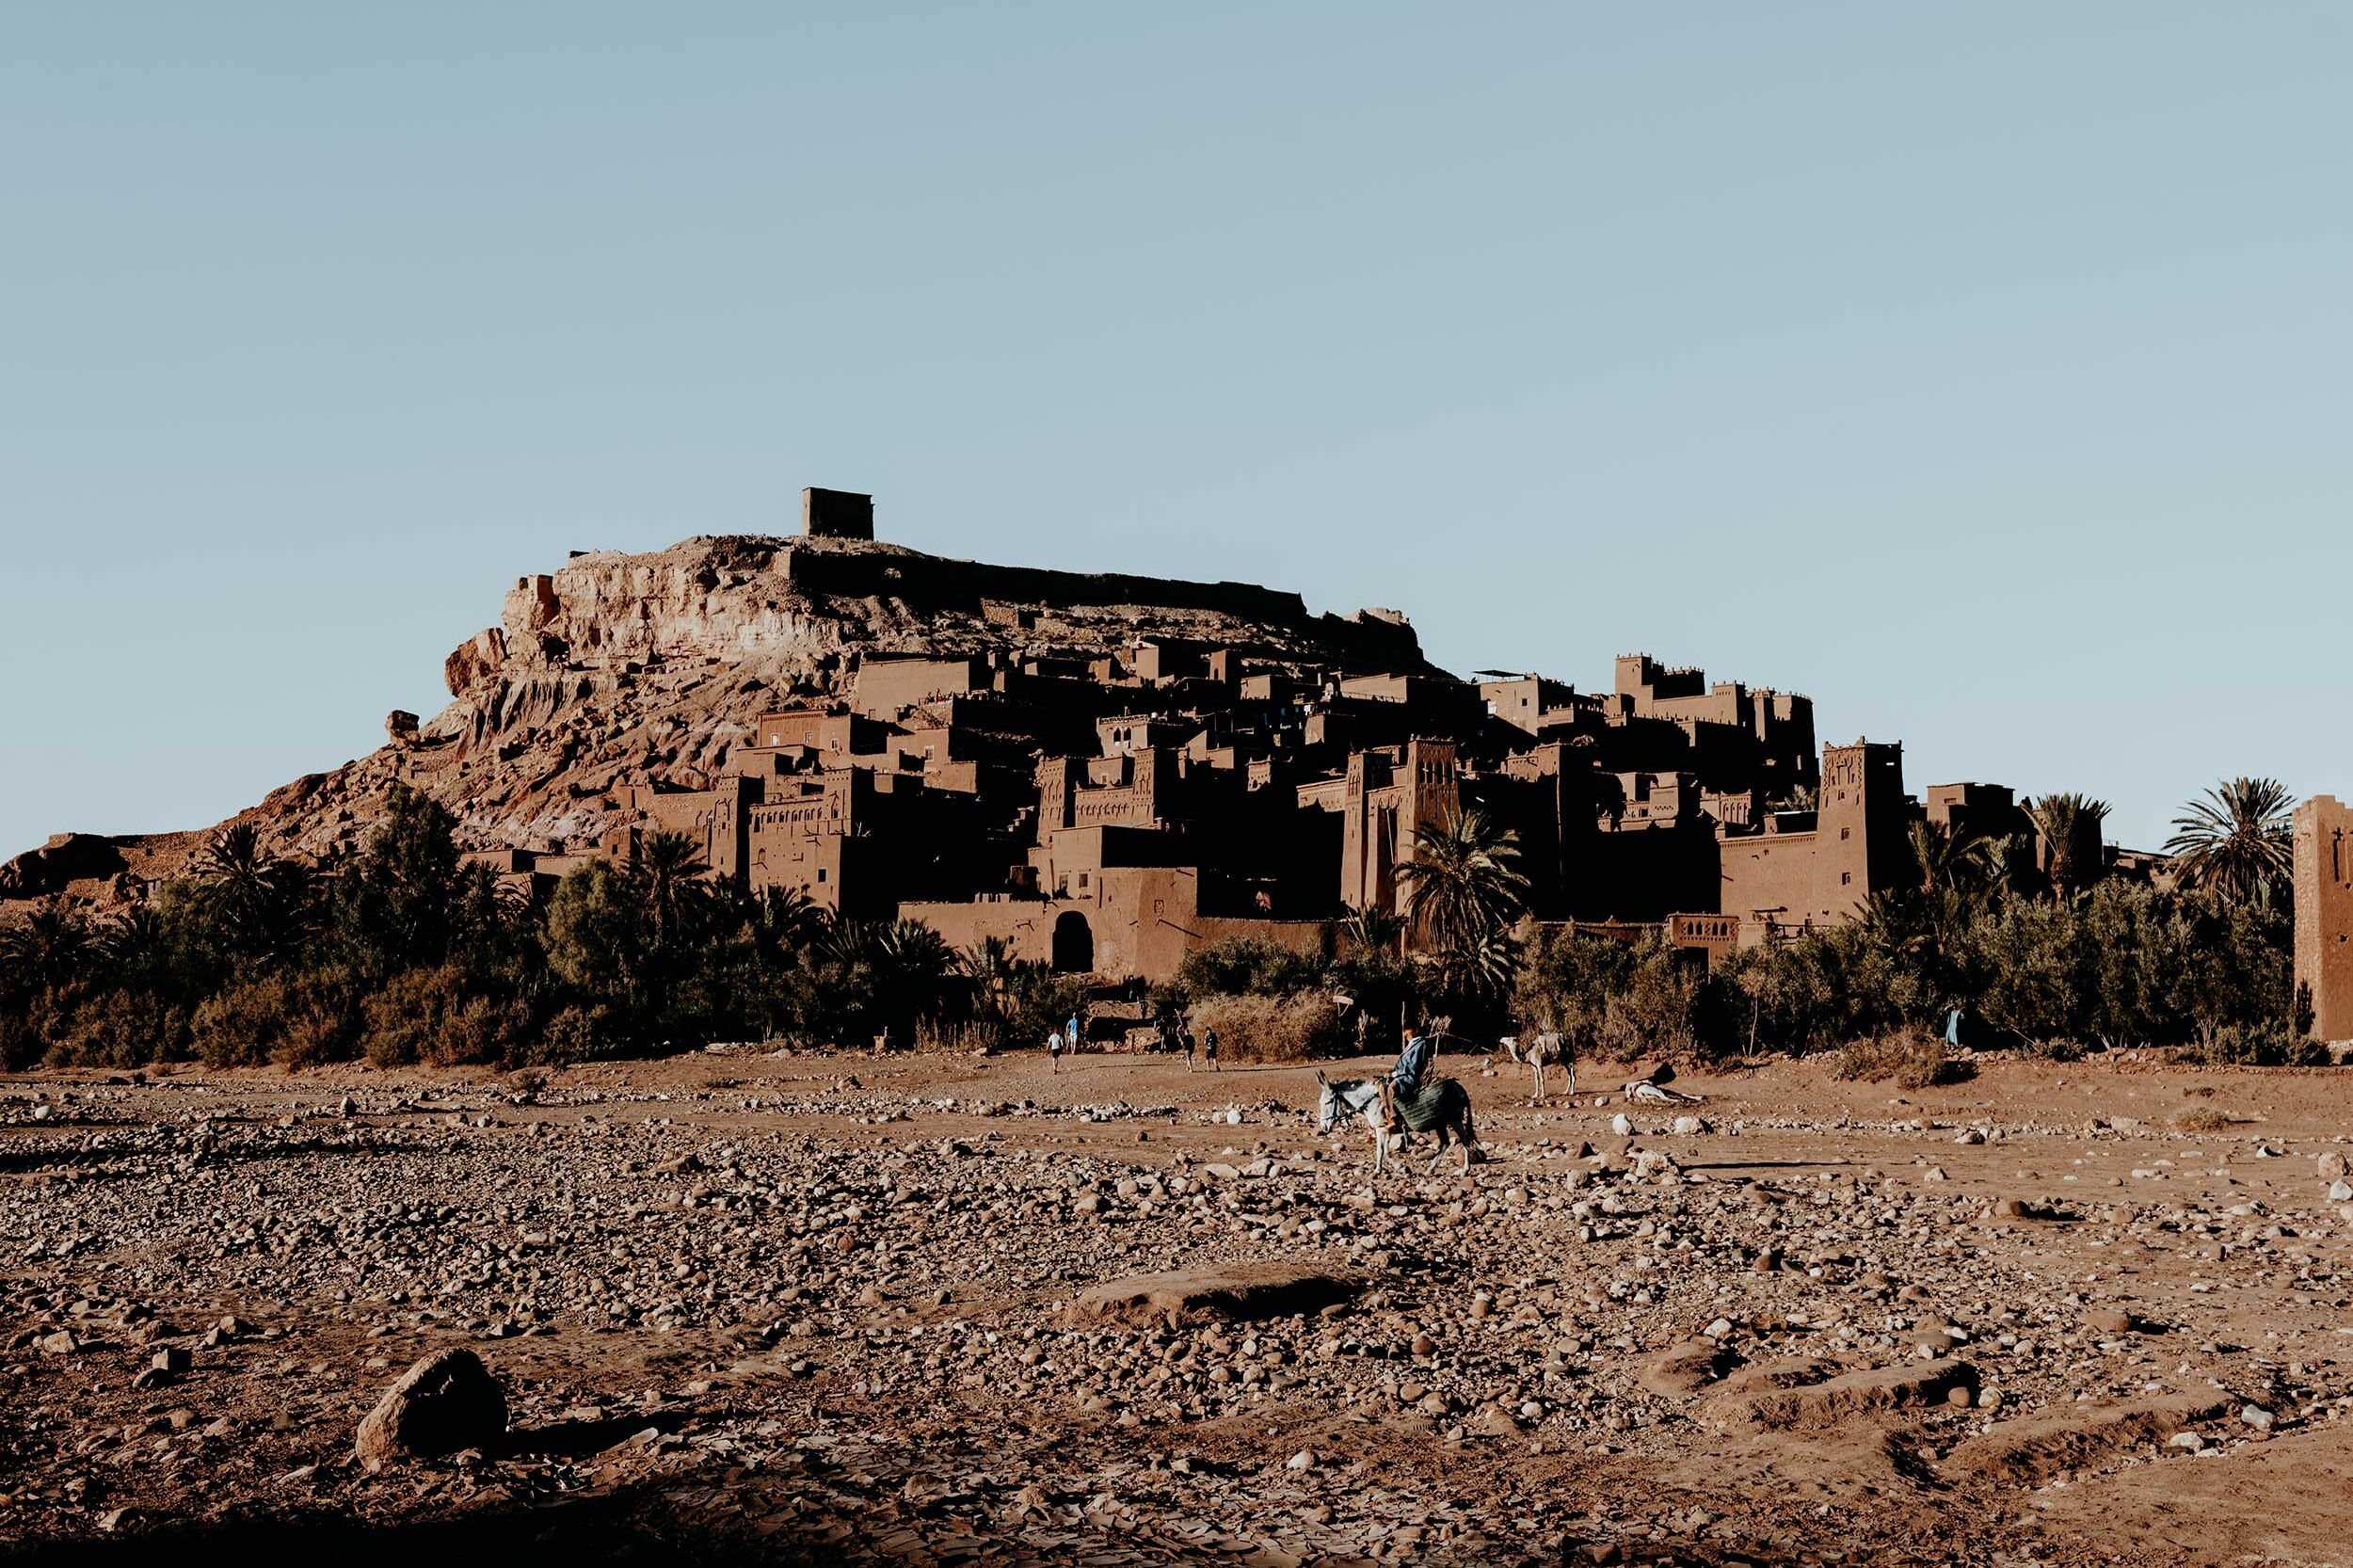 A guide to ait ben haddou in morocco